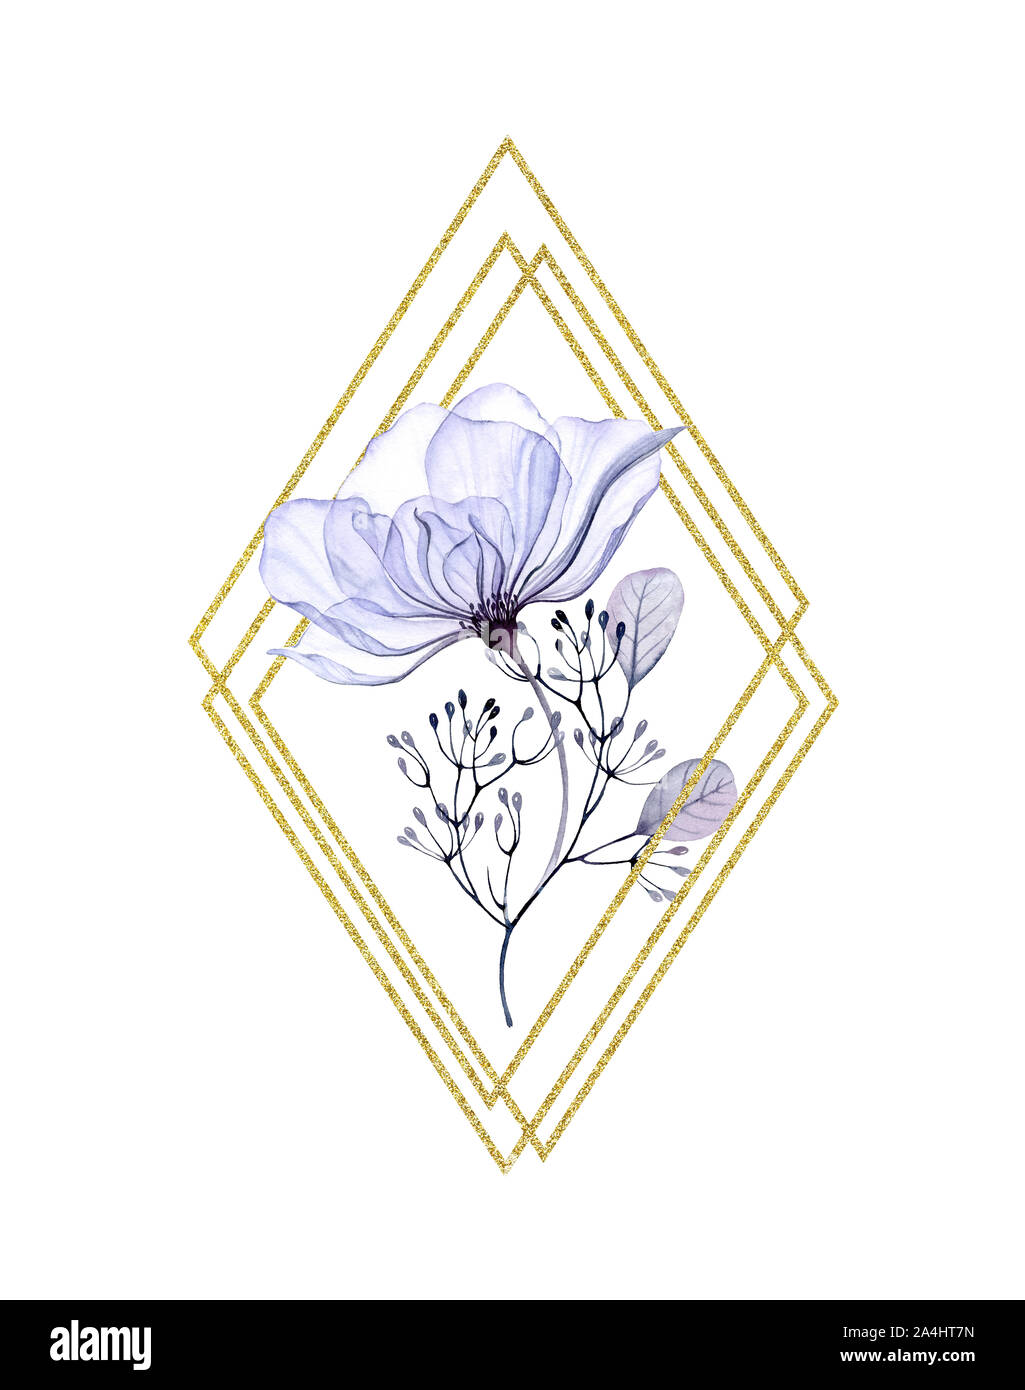 Watercolor Transparent Rose rhomb frame with golden glitter. Vertical arrangement with purple blue flowers, leaves and shiny foil. Hand painted floral Stock Photo